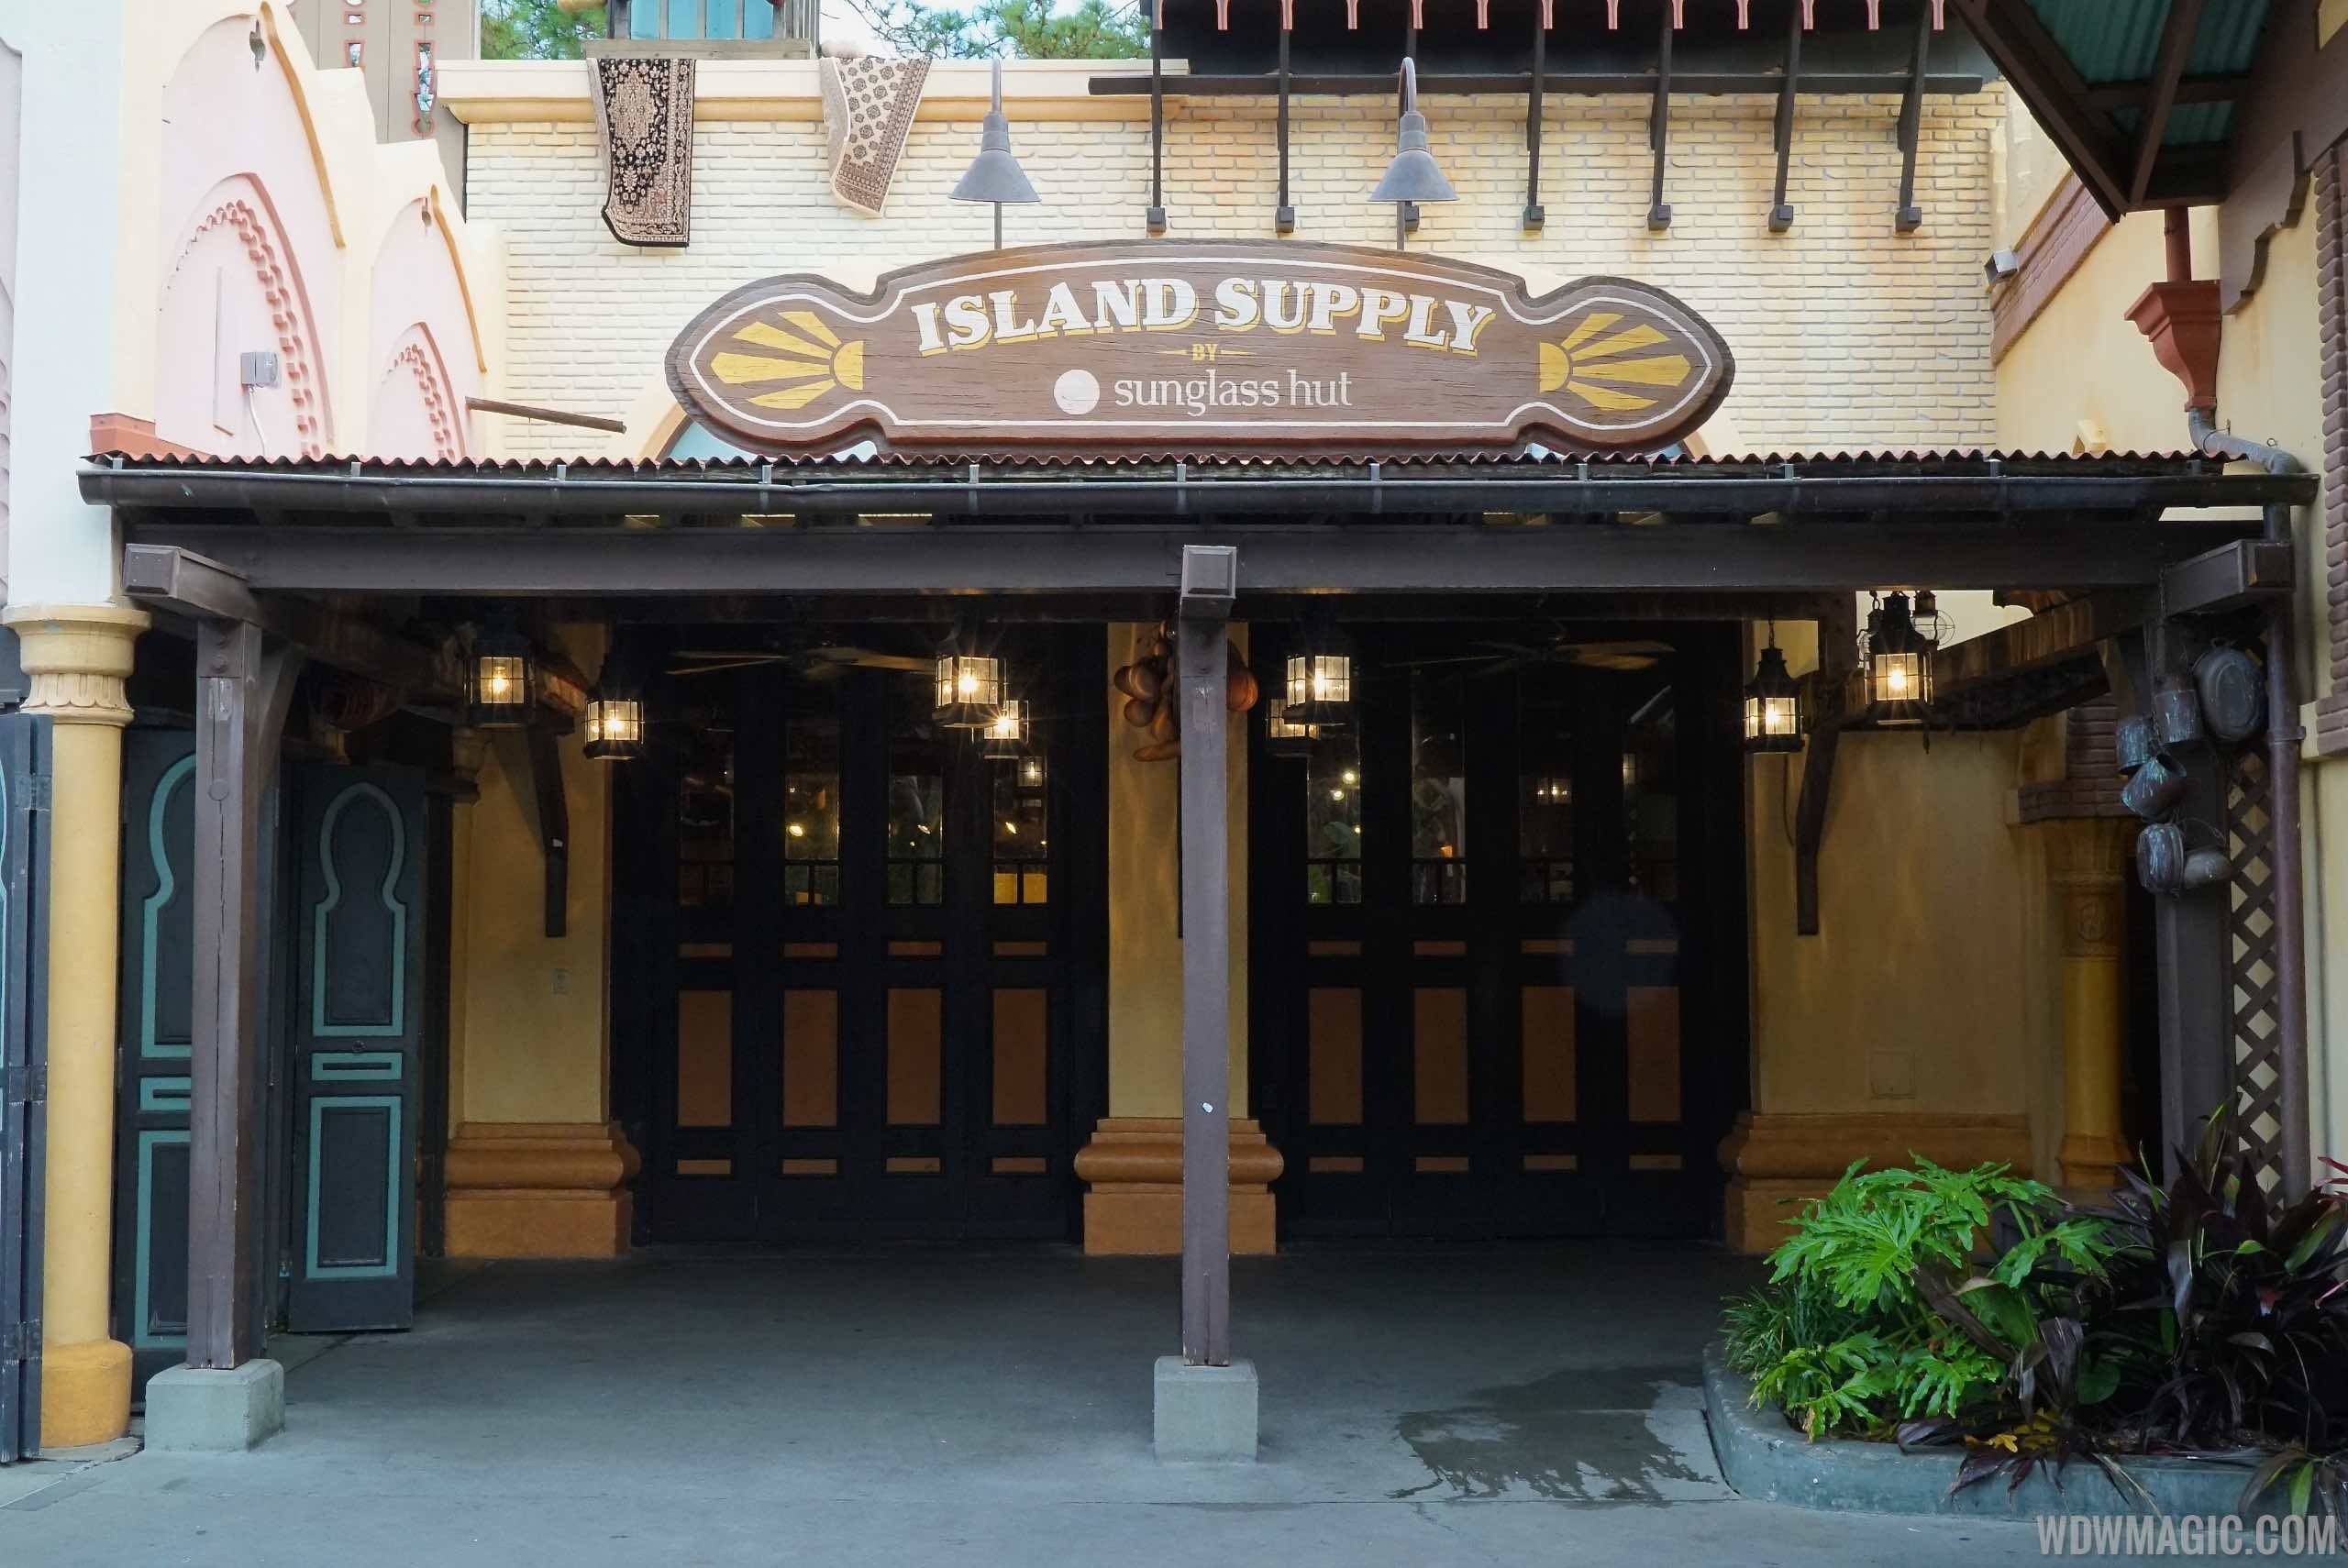 PHOTOS - Magic Kingdom's Island Supply by Sunglass Hut gets new store-front signage